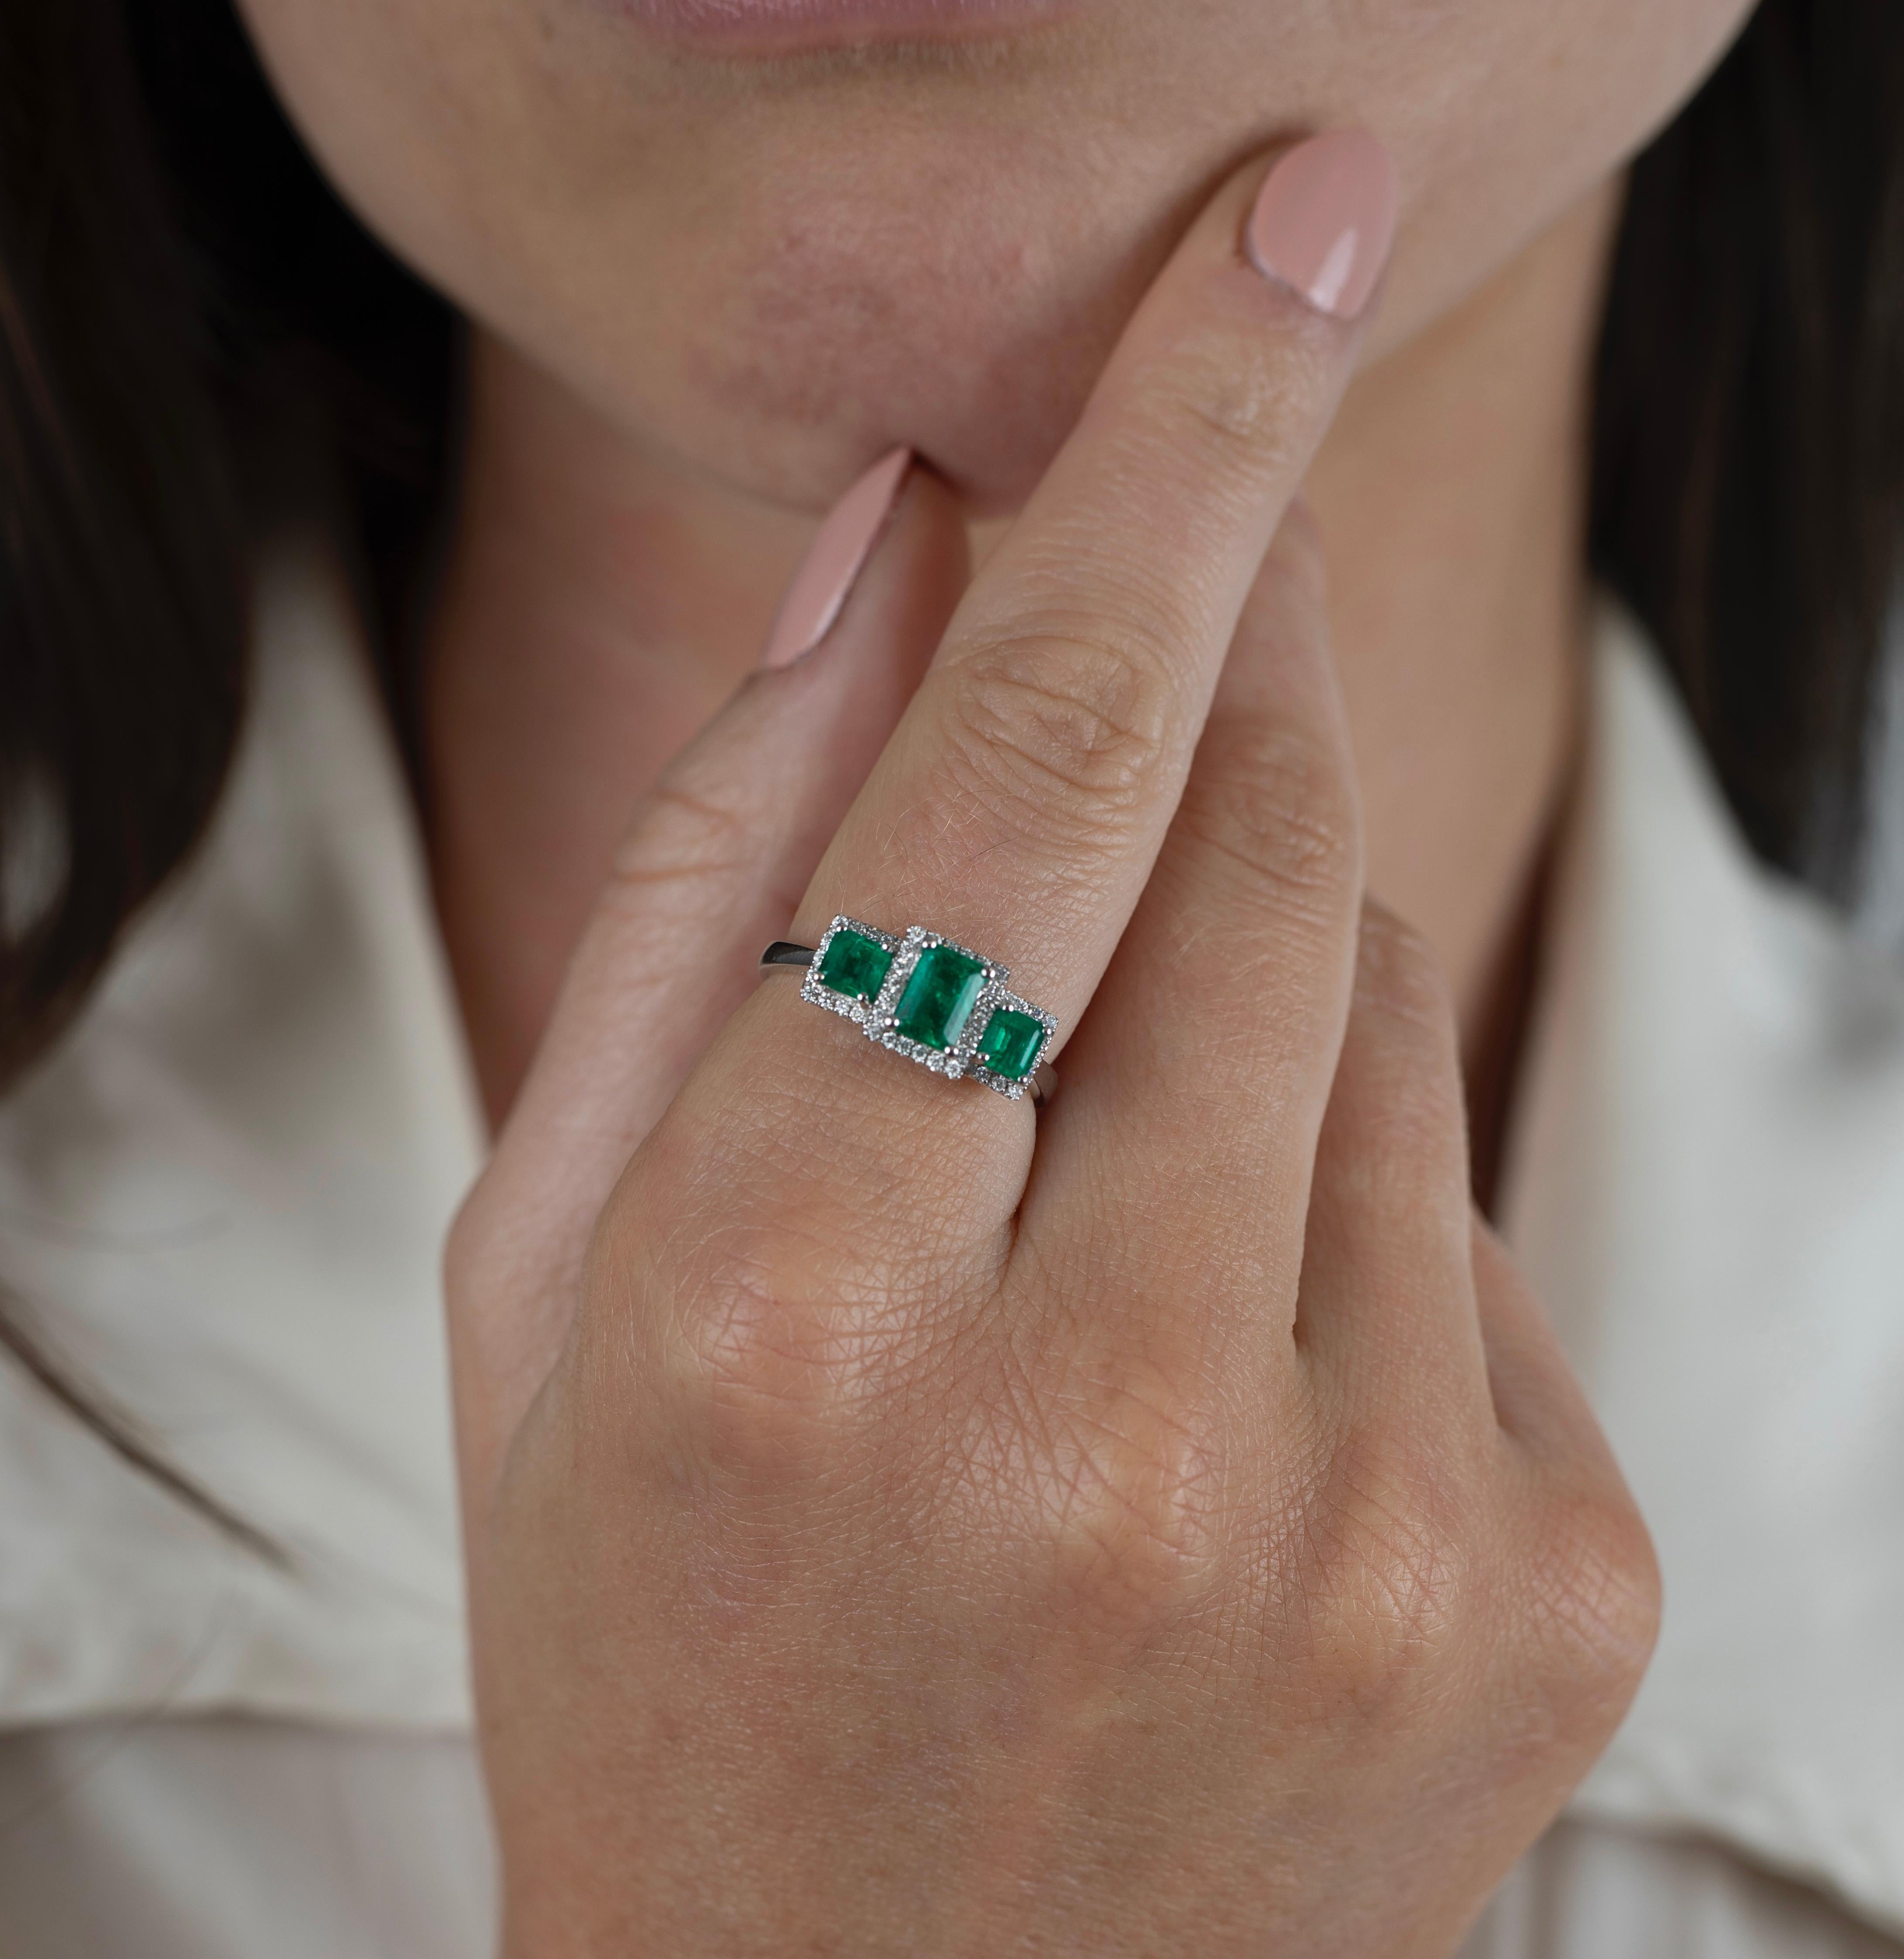 Three-Stone 1.03 Carats Emerald-Cut Vivid Green Natural Colombian Emeralds accented by 0.19 Carats of Round-Brilliant Cut Diamonds and set in a delicate 18K White Gold setting.

Details:
✔ Stone: Emerald
✔ Emerald Weight: 1.03 carat (total weight)
✔